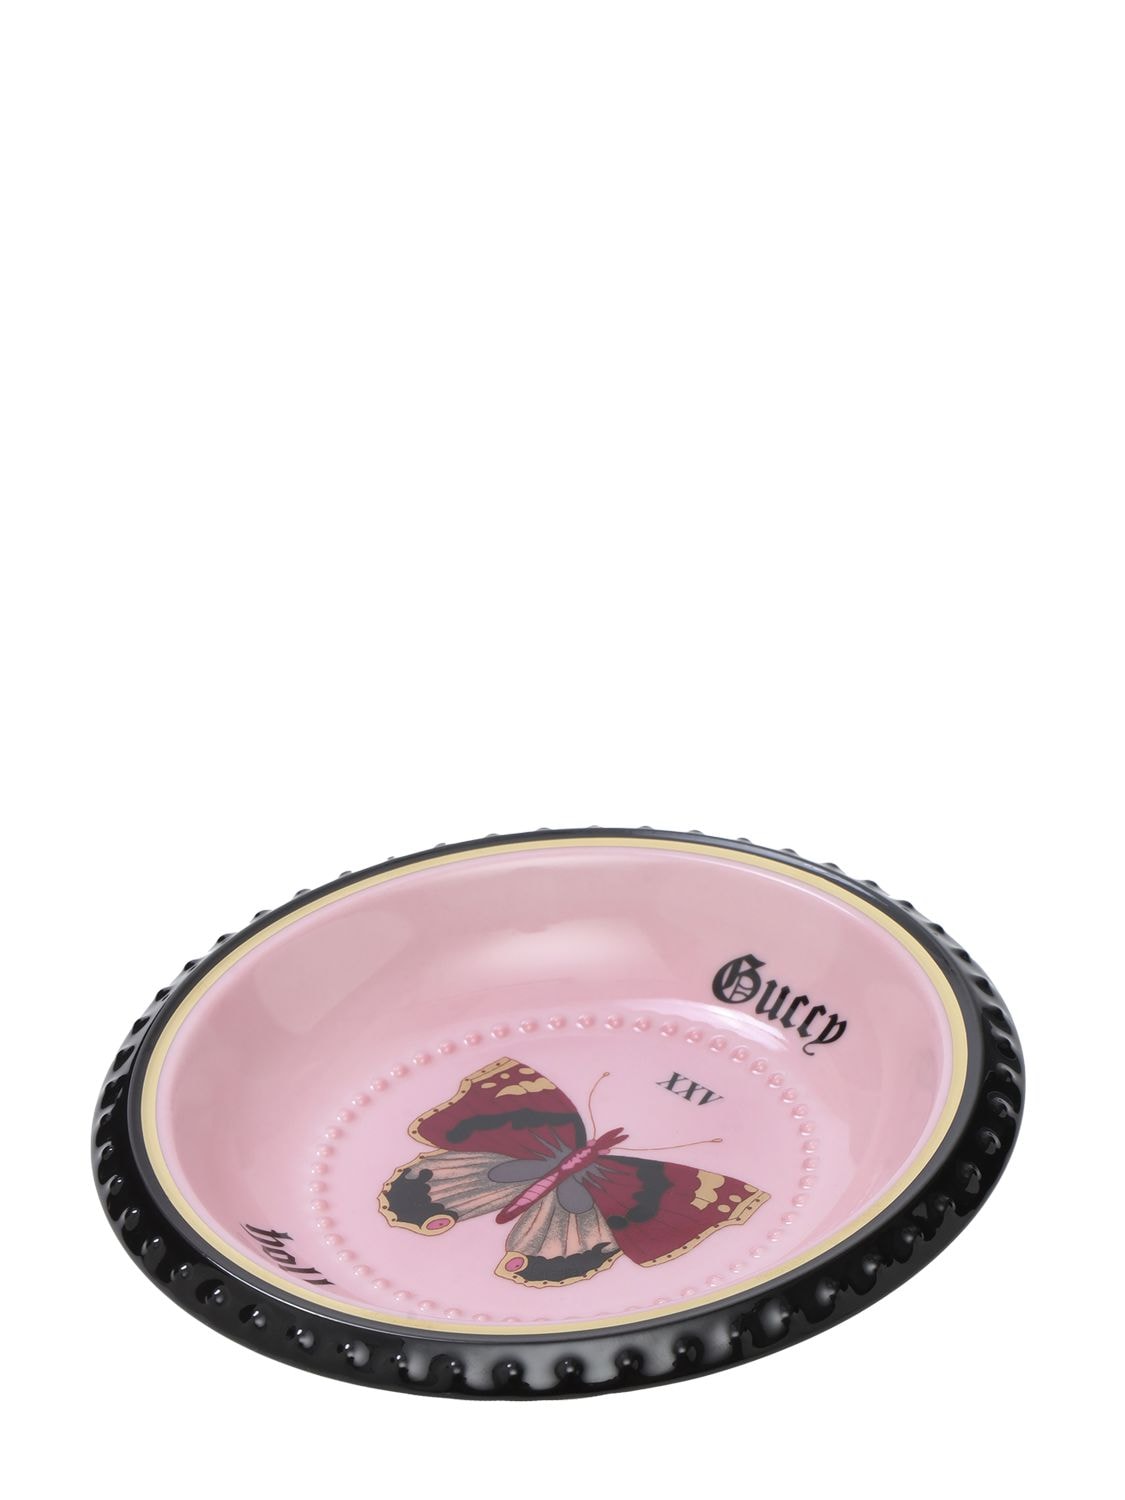 GUCCI BUTTERFLY ROUND PORCELAIN VALET TRAY,72IXX9013-NTEYMG2